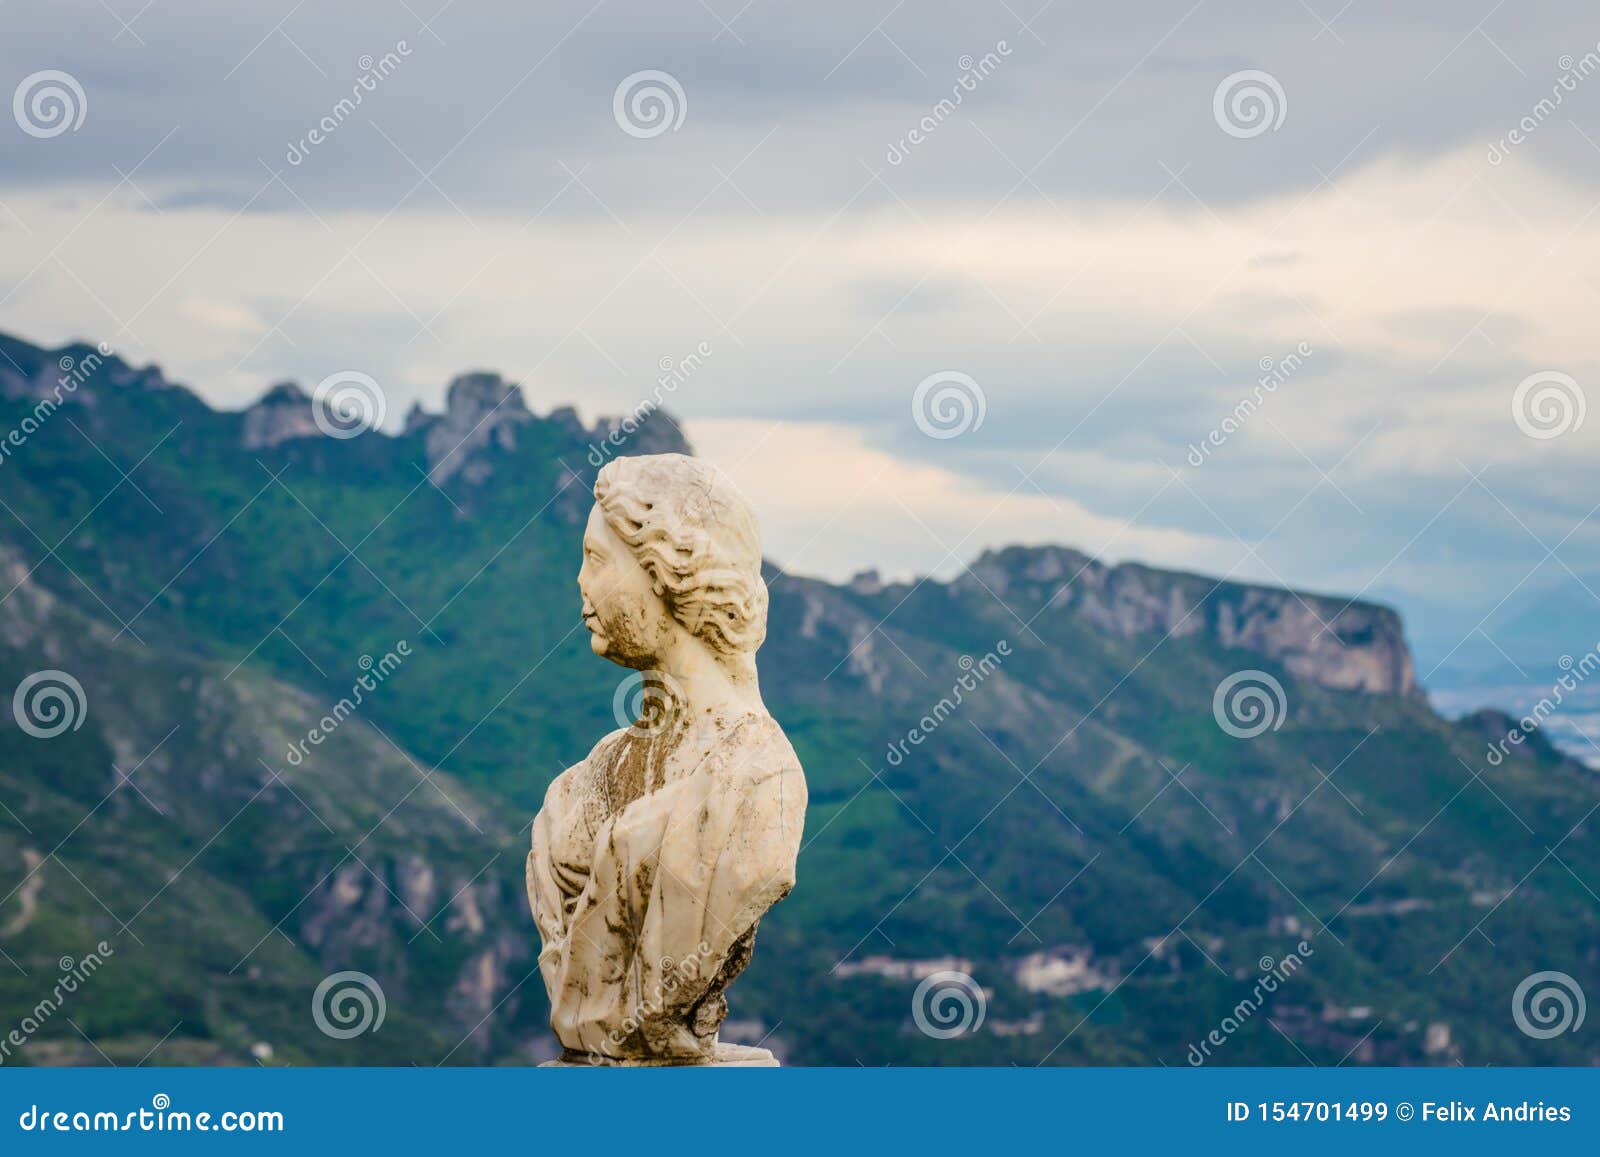 beautiful statue from the belvedere, the so-called terrazza dell`infinito, the terrace of infinity seen on the sunset, villa cimbr